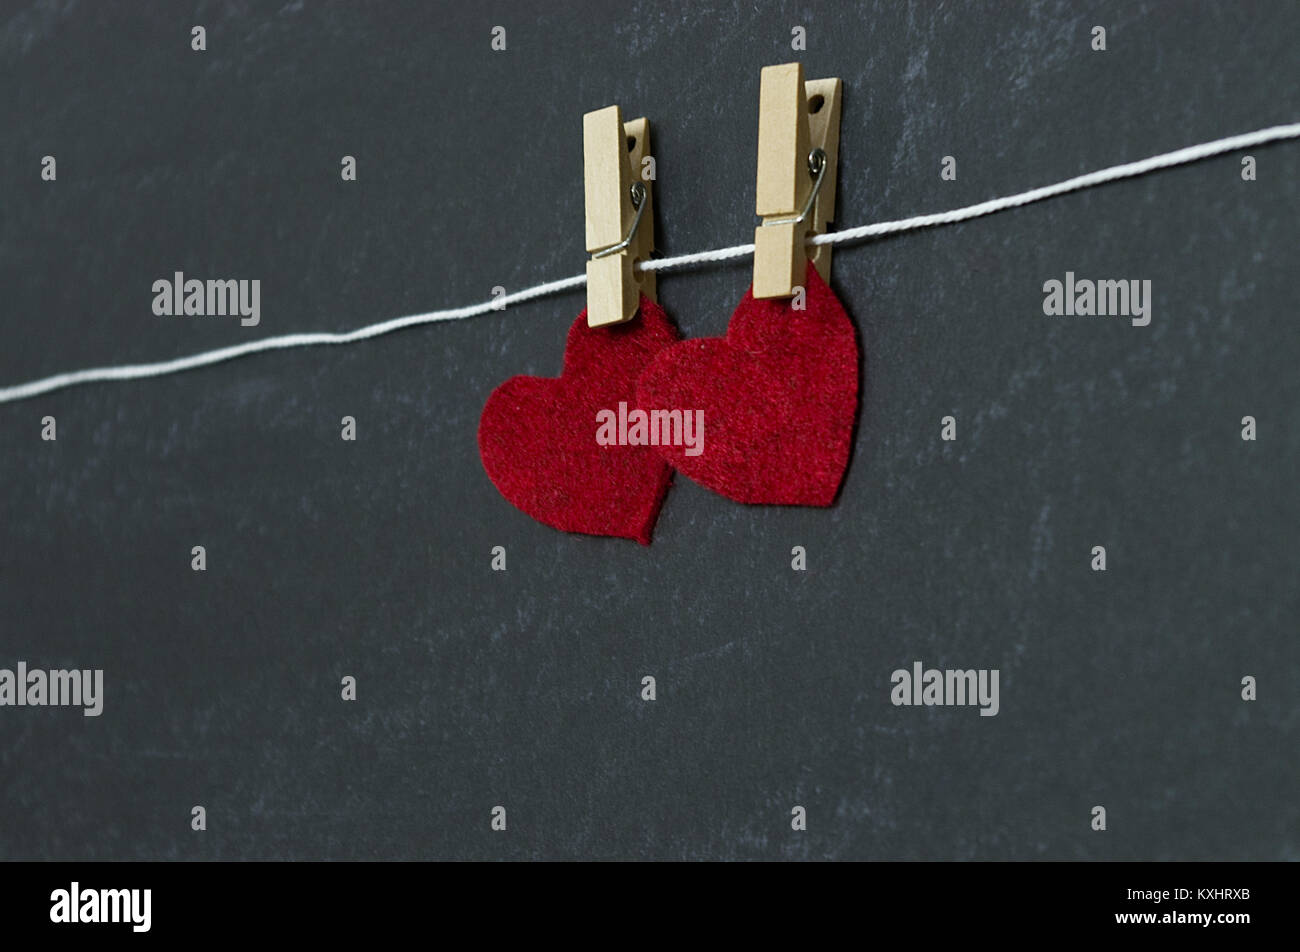 Red hearts hanging at an angle from clothespin in front of chalkboard background Stock Photo